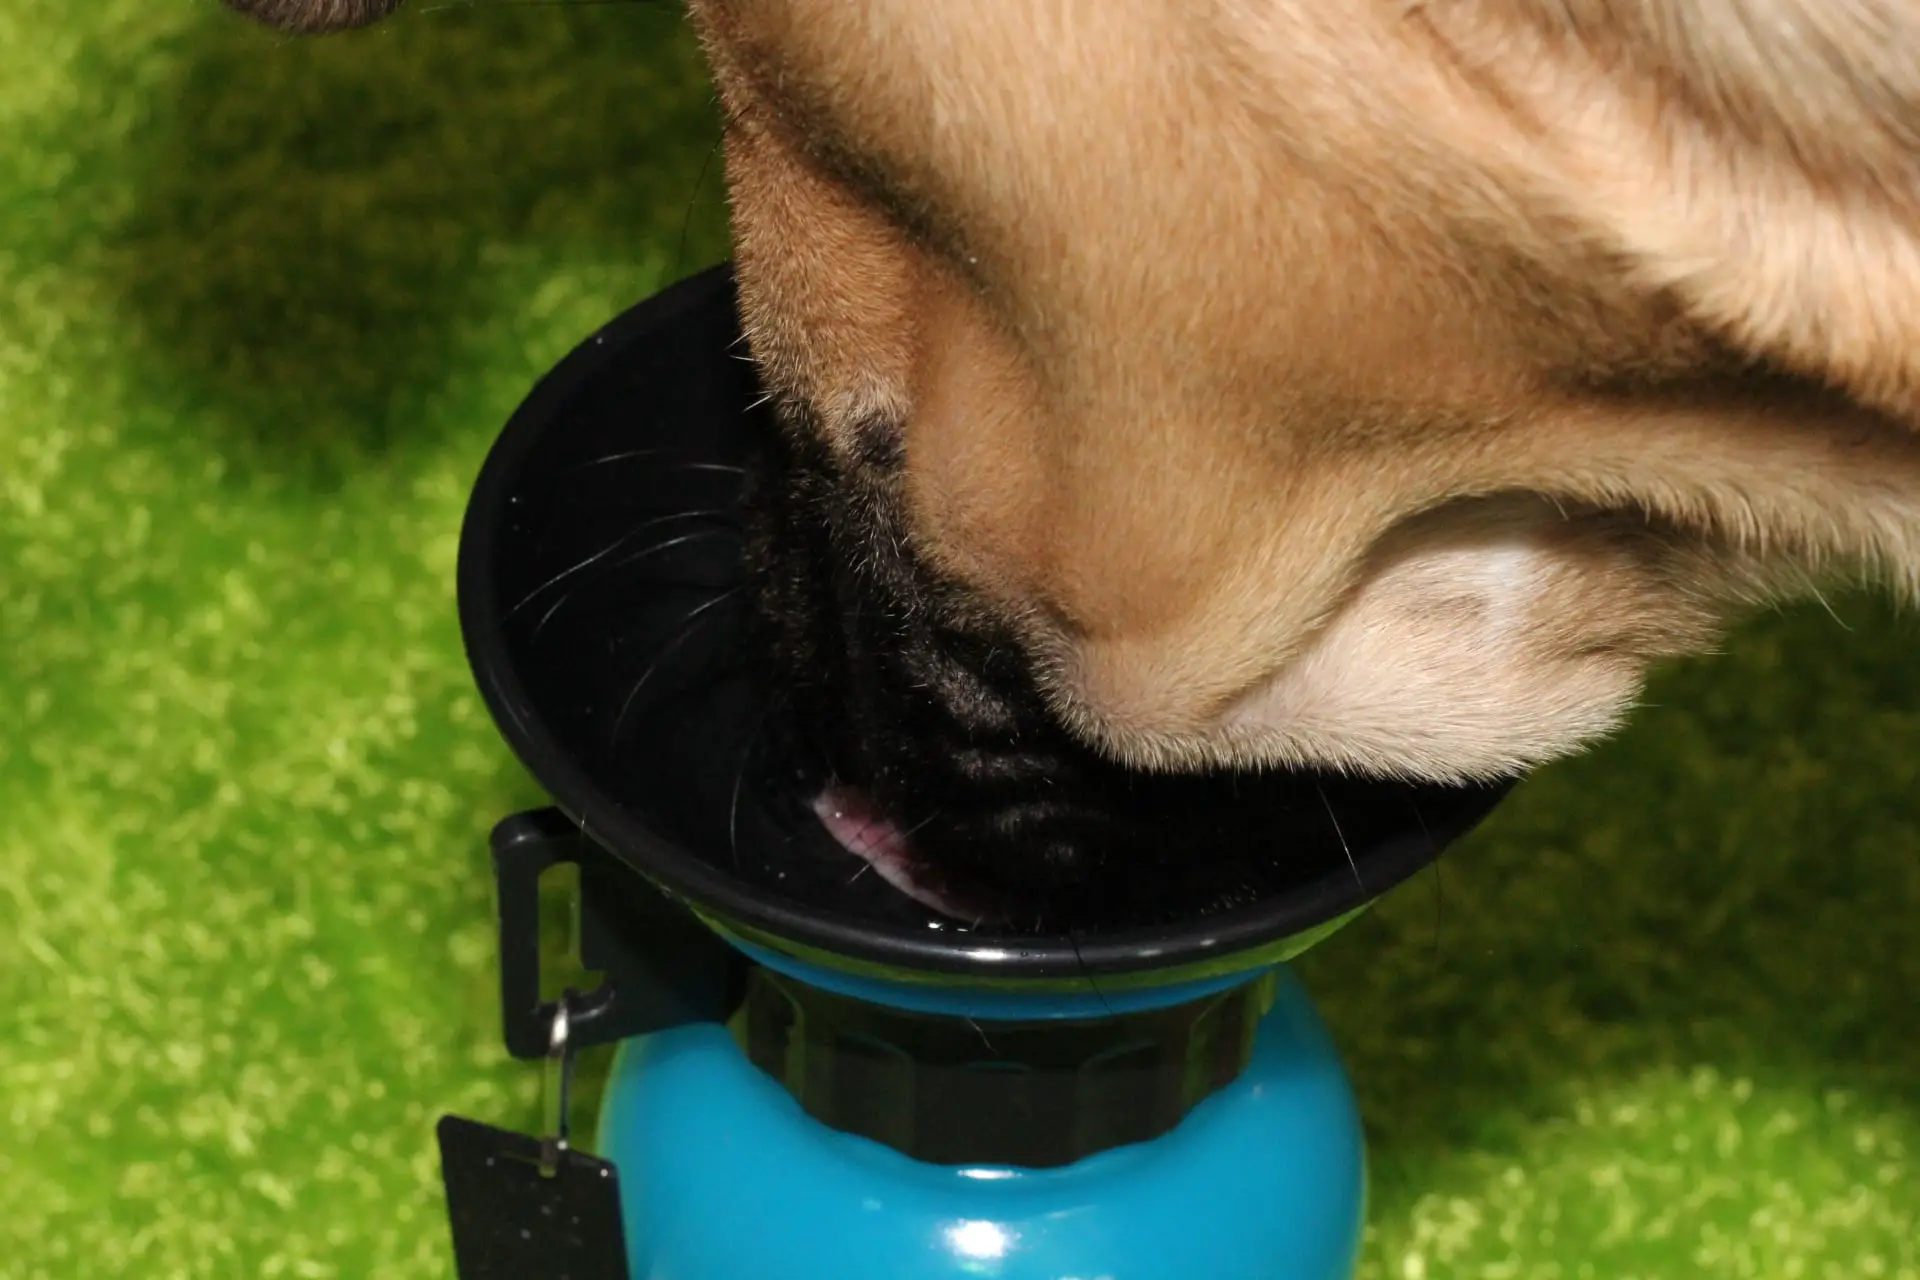 Summer Safety Tips For Dogs & Help Stay Hydrated With Aqua Dog